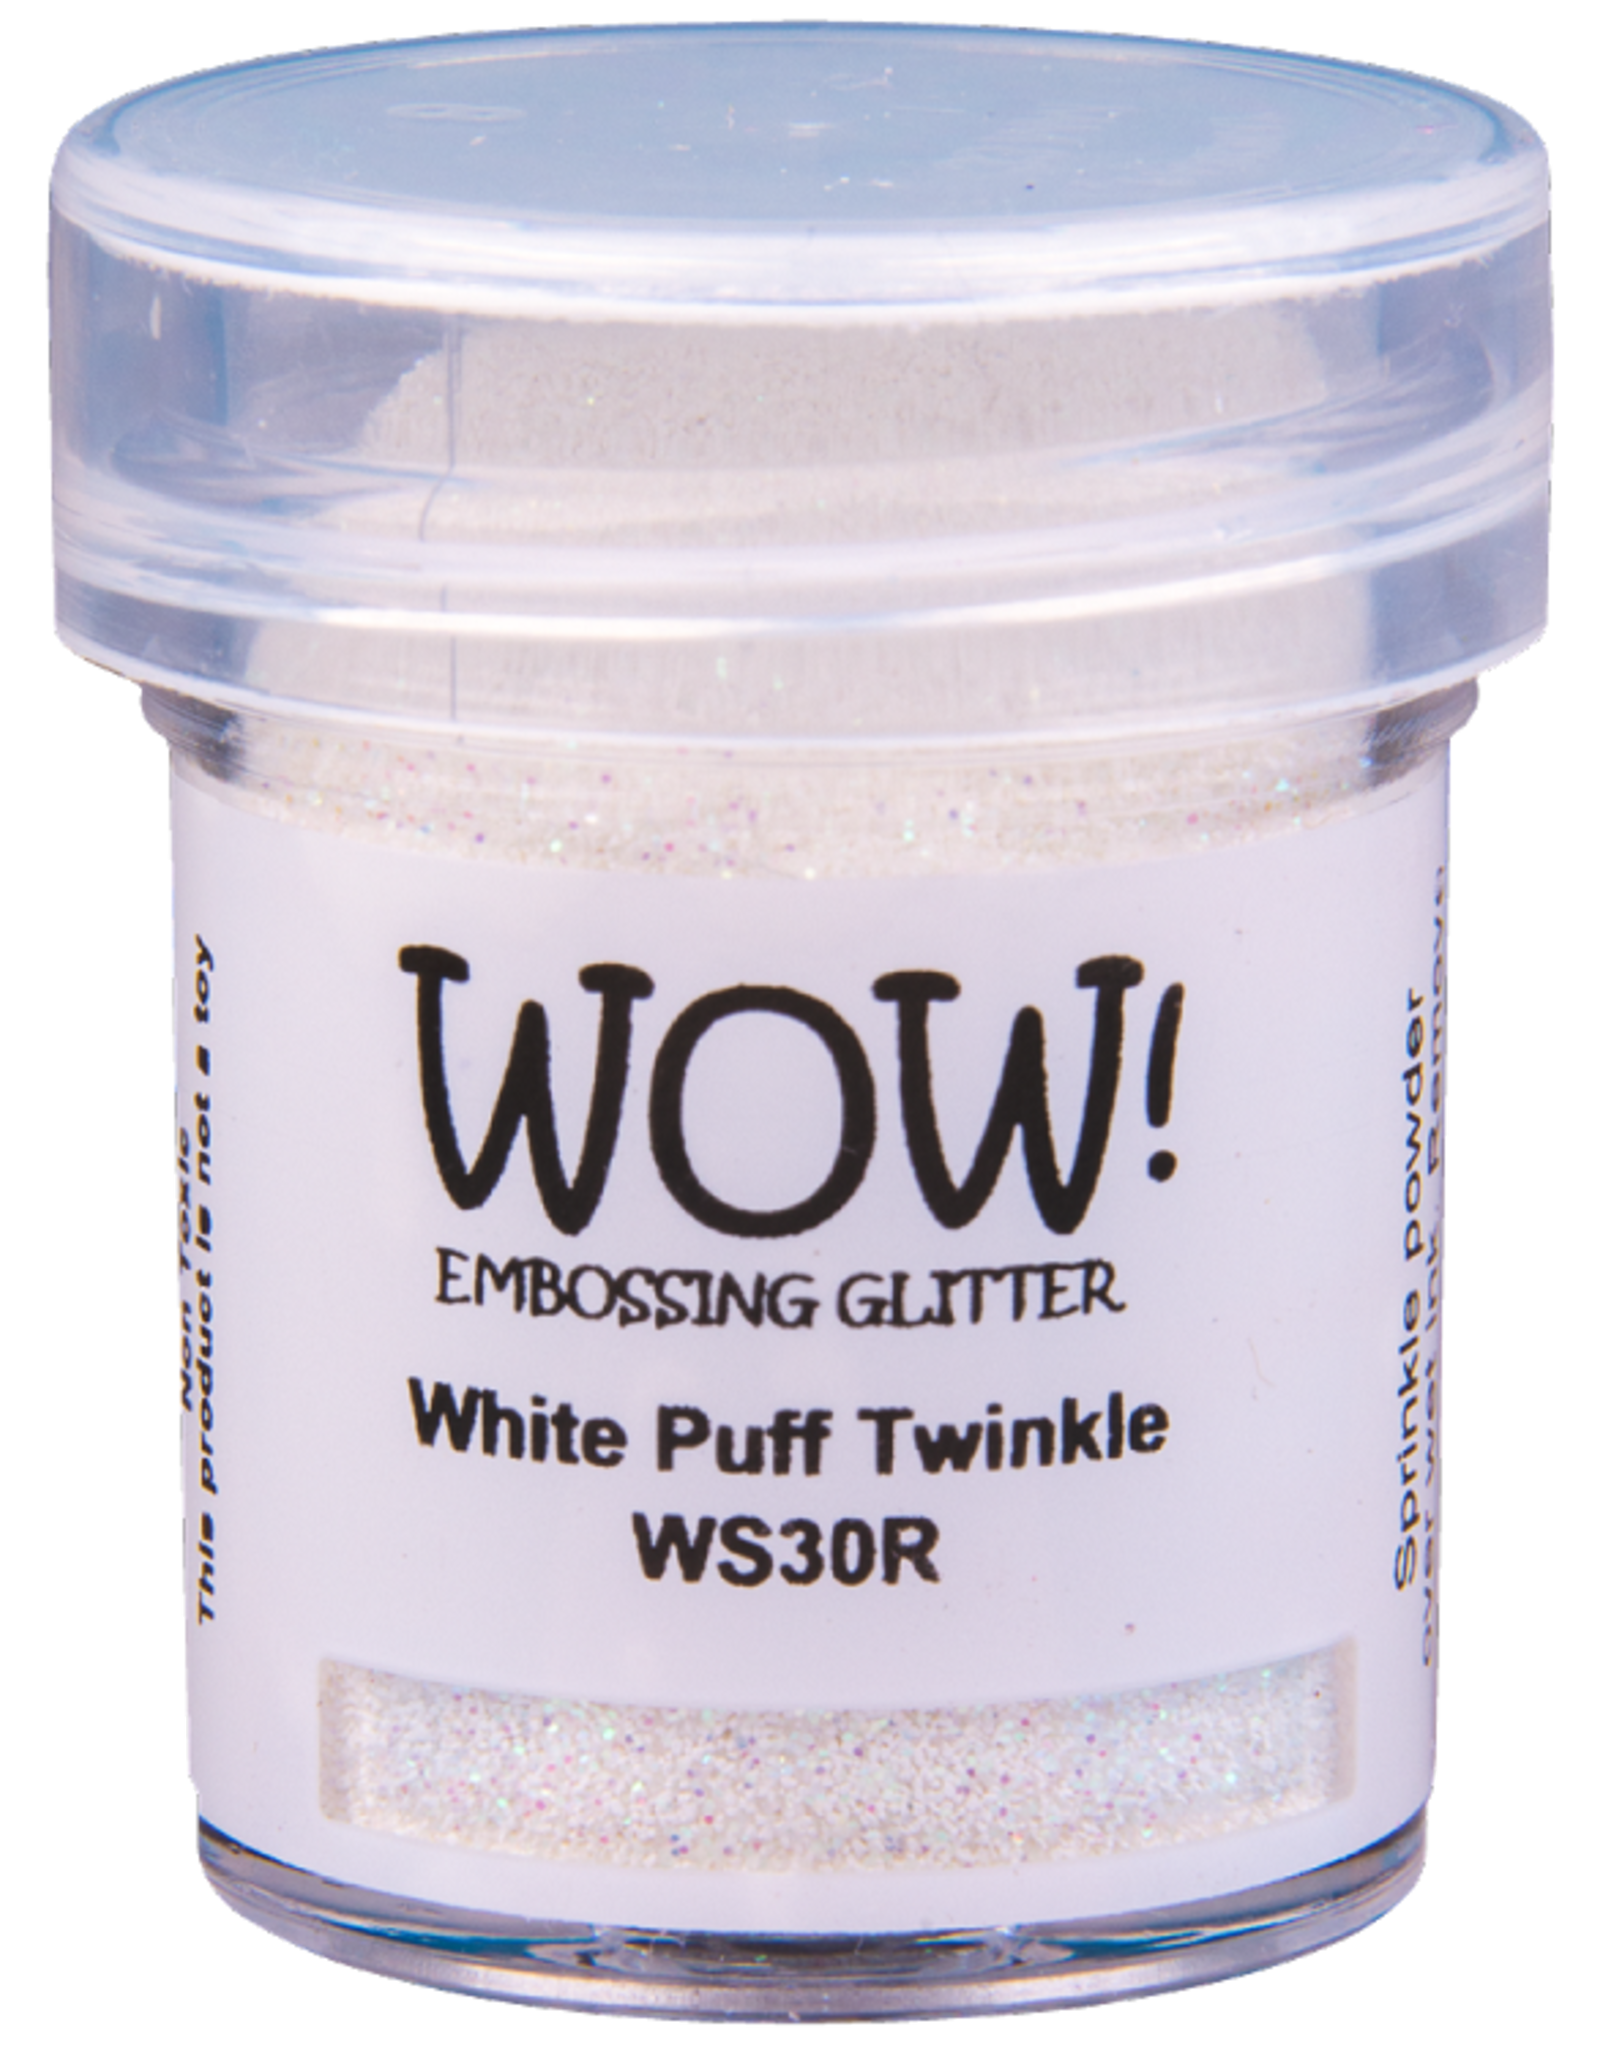 WOW! WOW! WHITE PUFF TWINKLE EMBOSSING GLITTER 0.5OZ